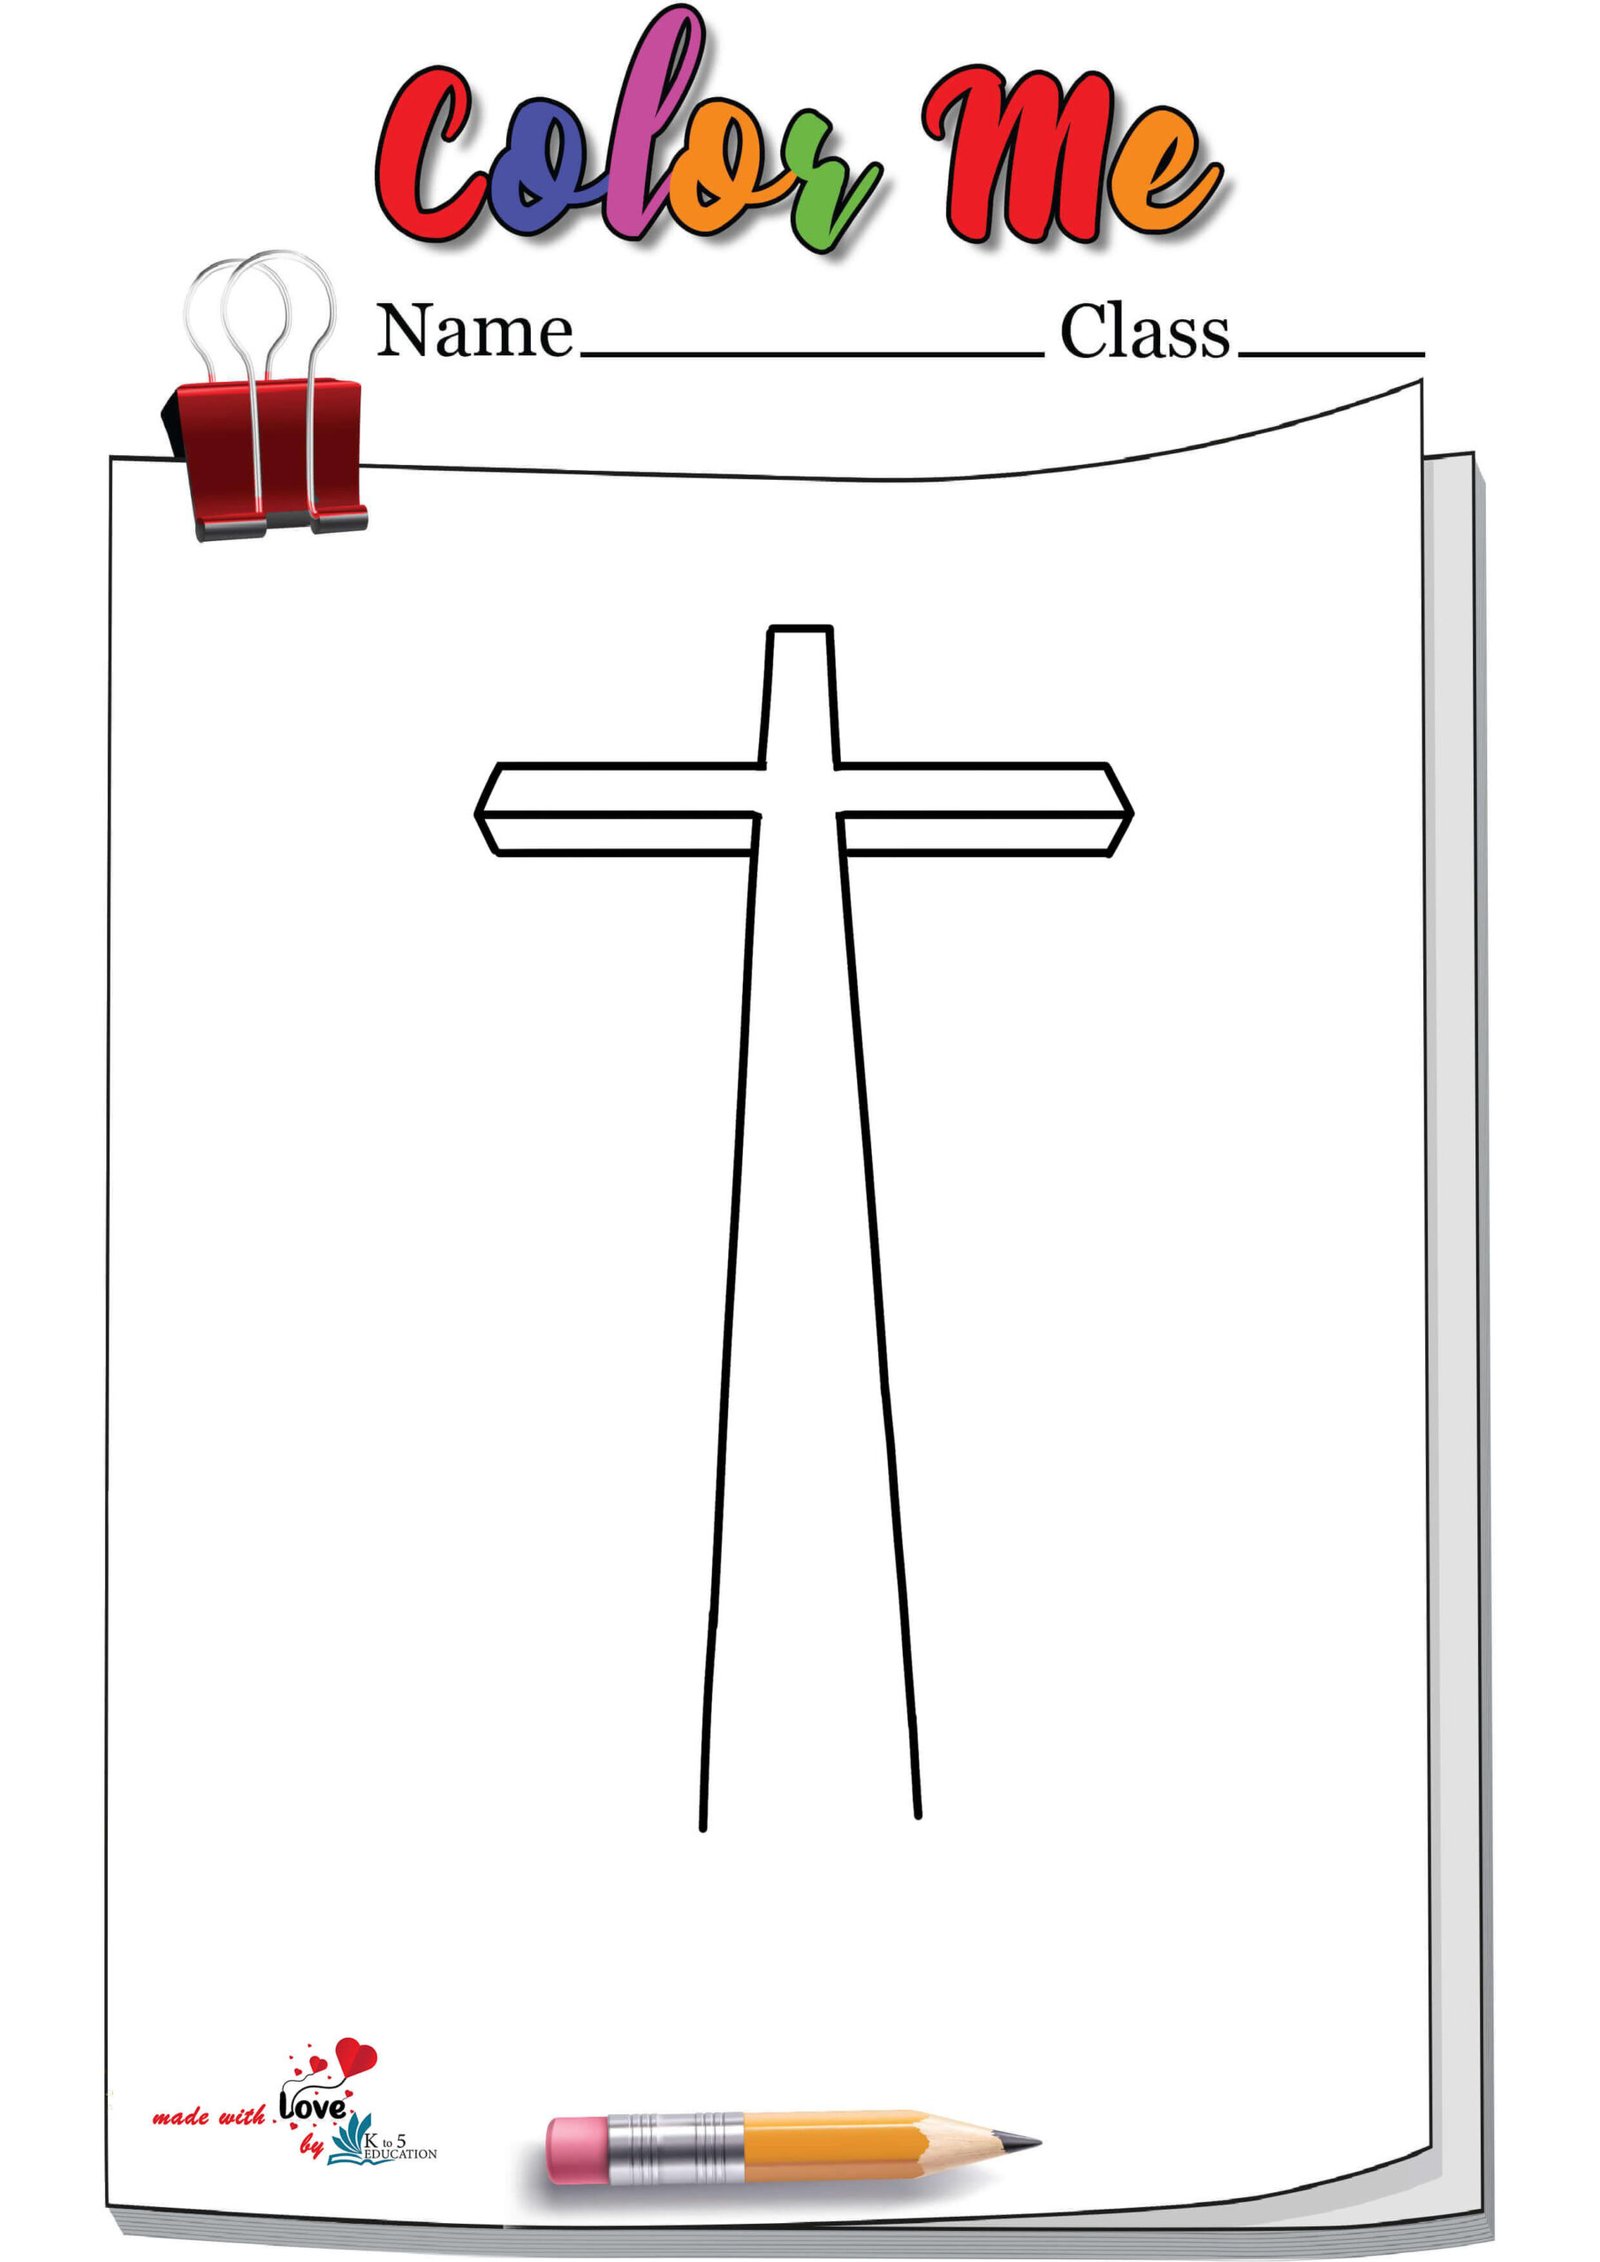 Easter Jesus Cross Coloring Page